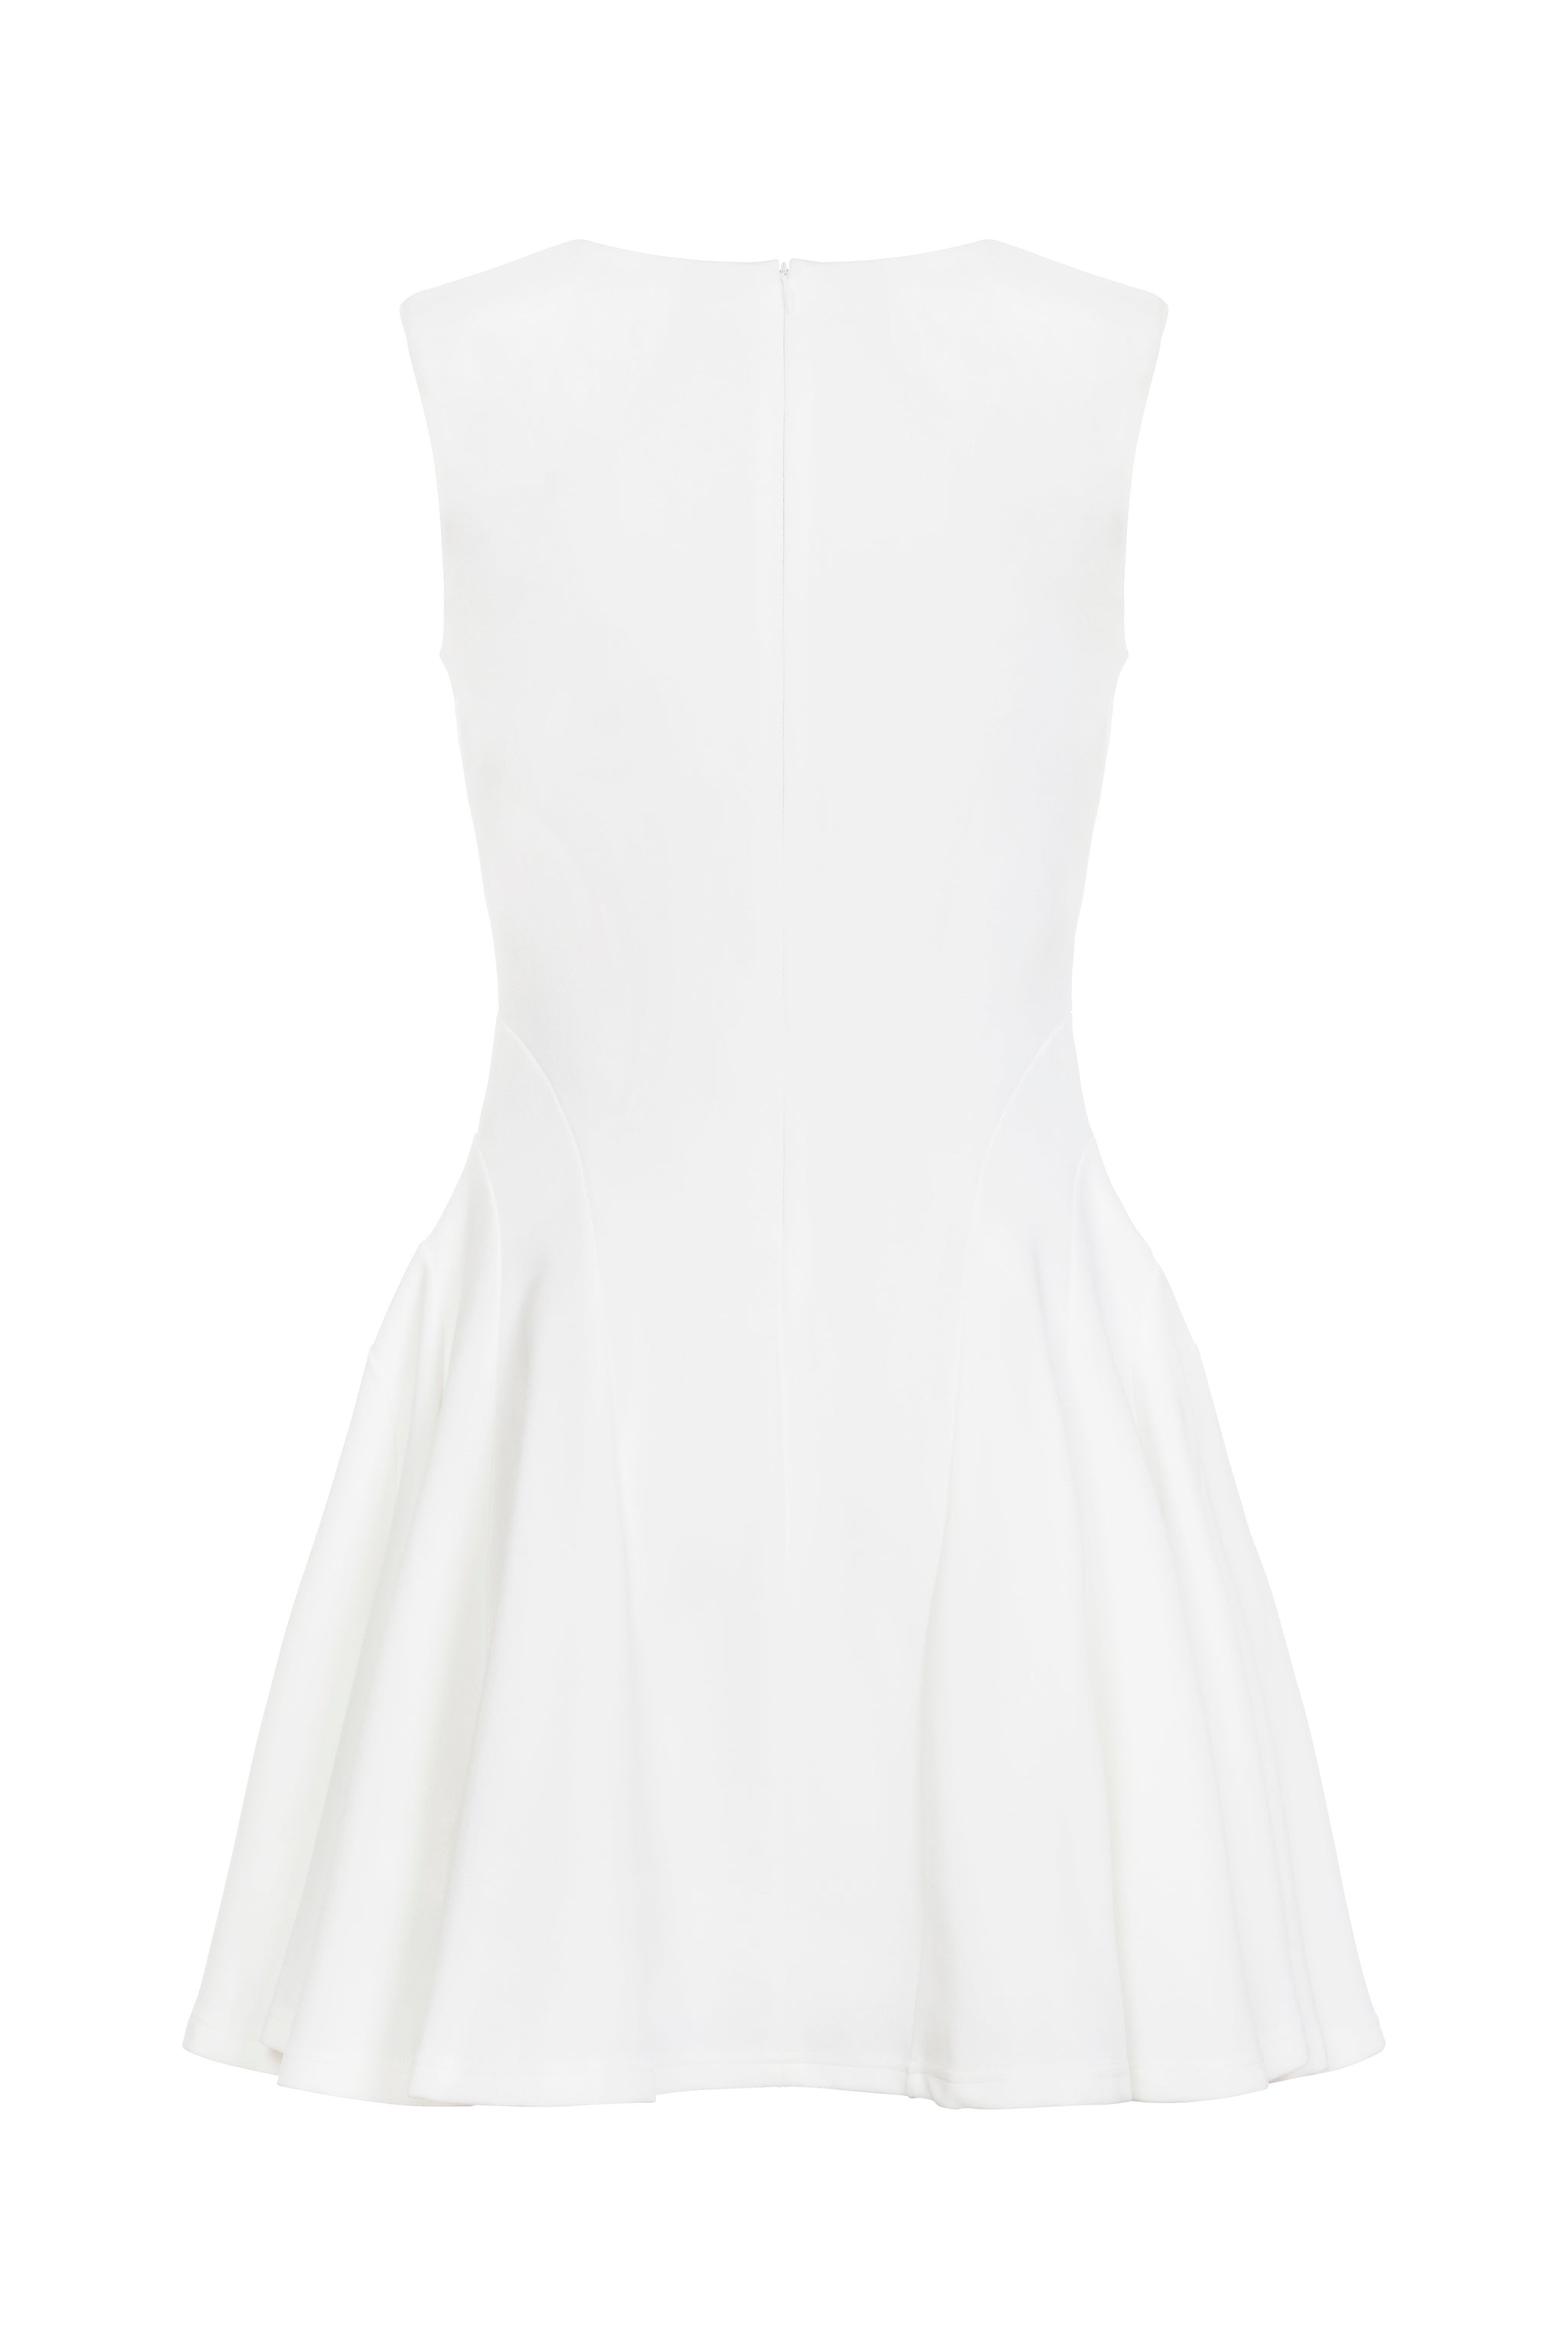 Fit & Flare Dress (White)